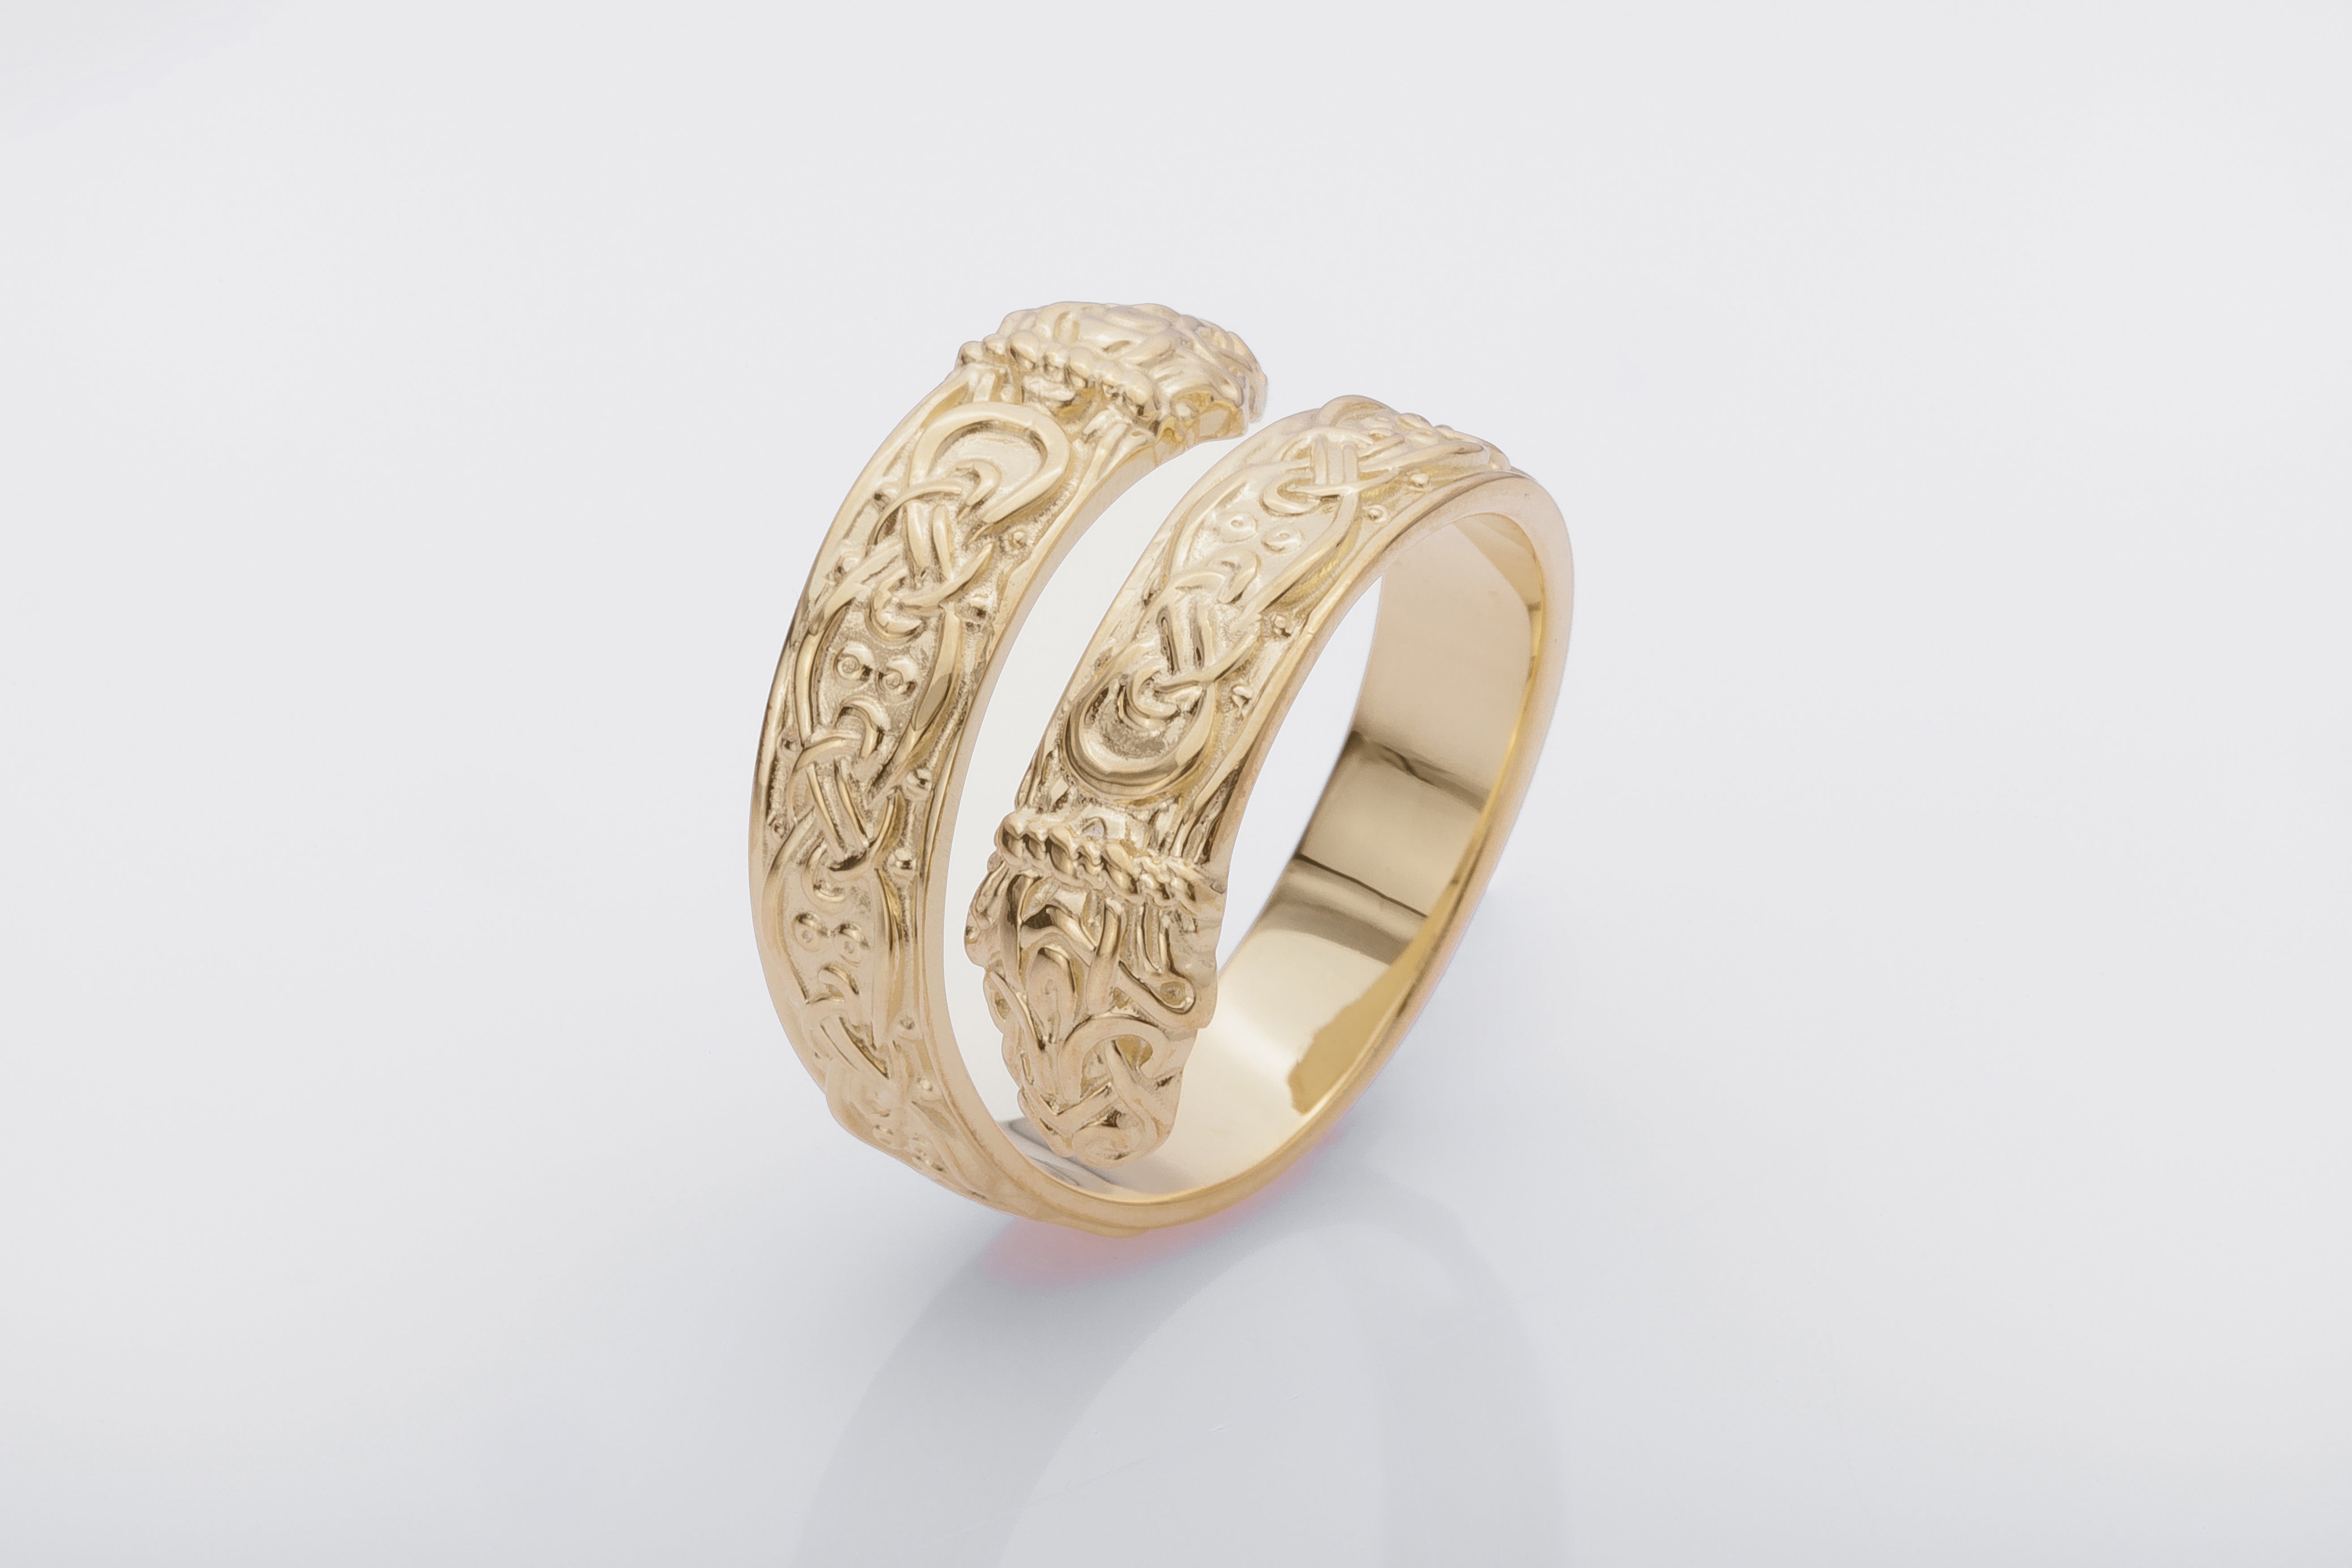 14K Ouroboros Ring with Viking Ornament Norse Jewelry - vikingworkshop